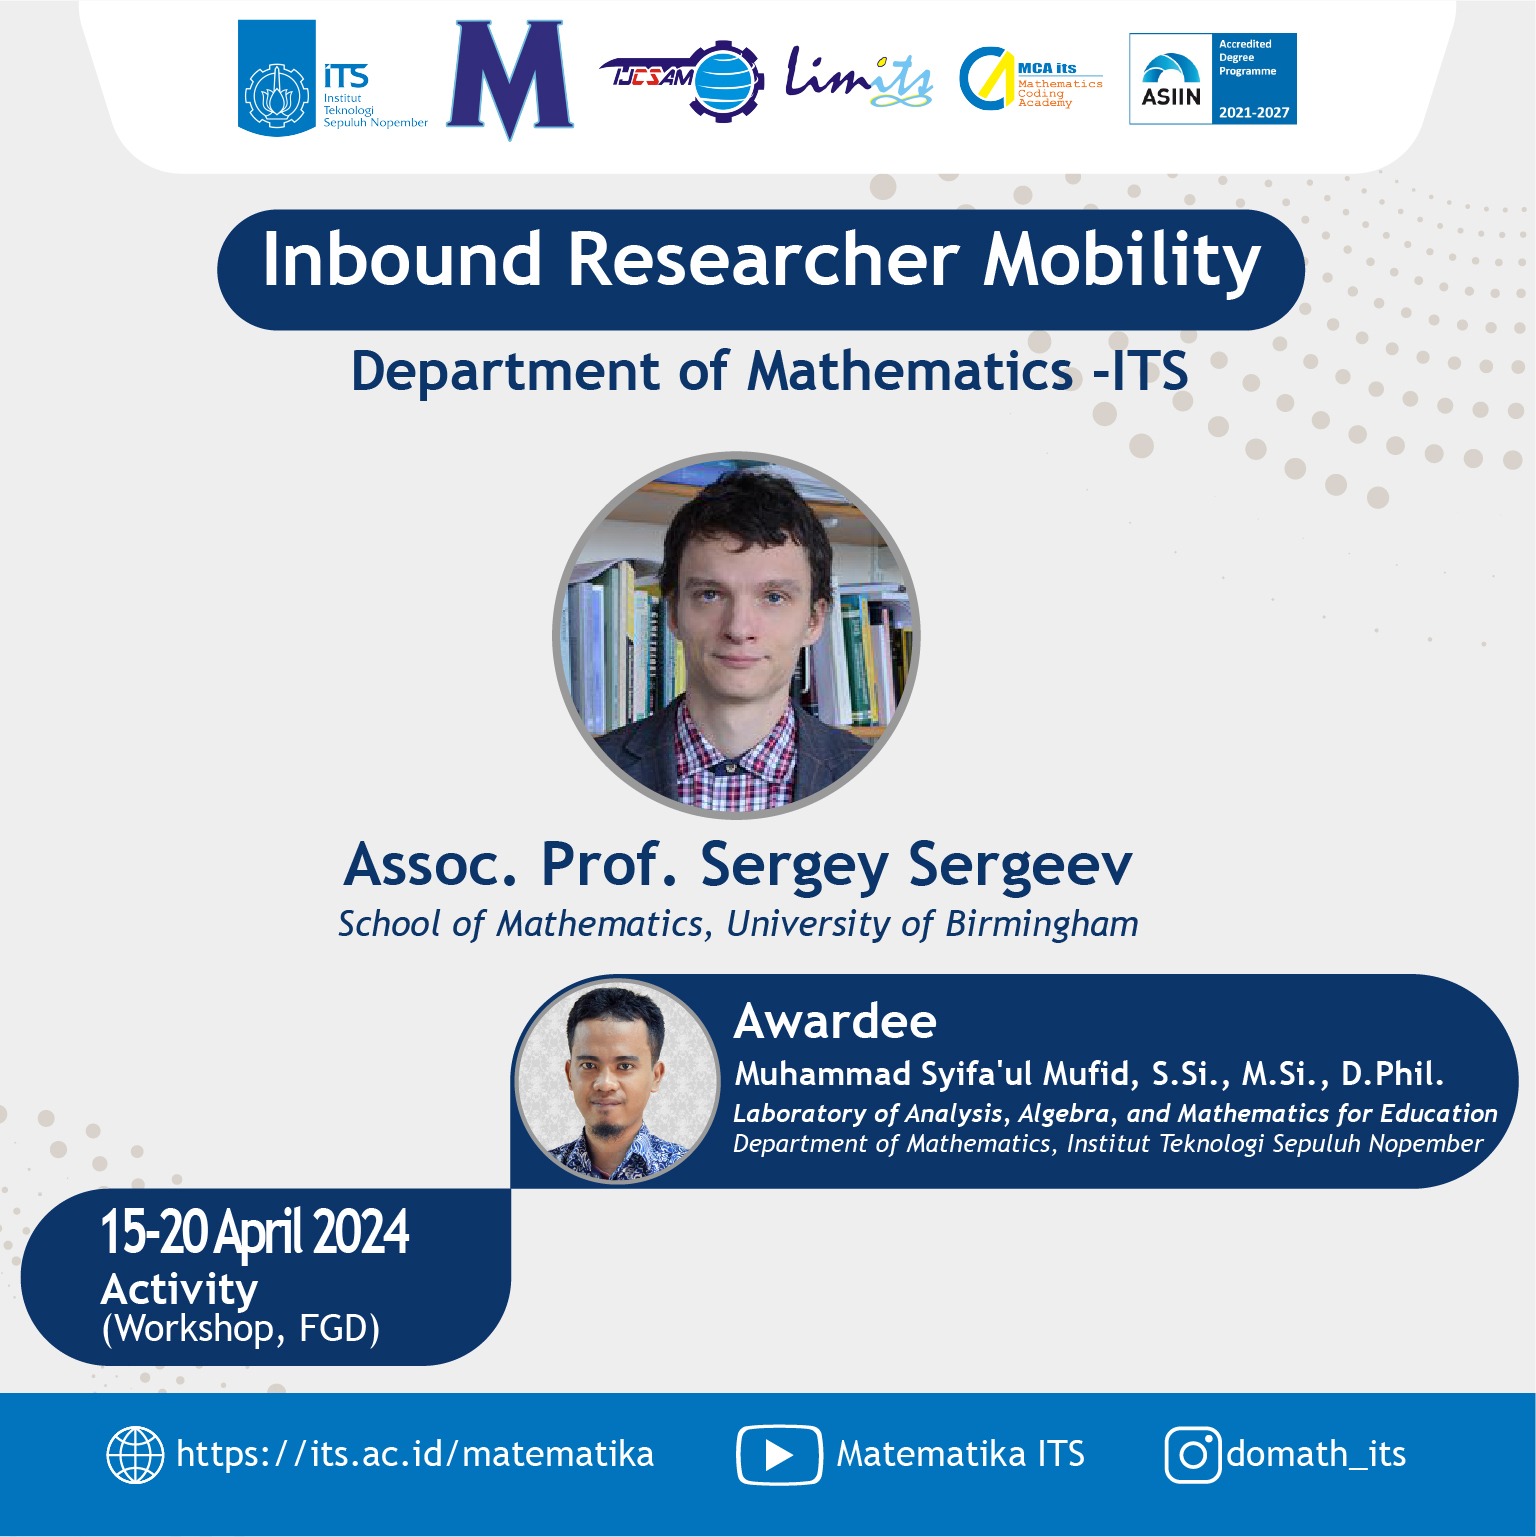 Inbound Researcher Mobility